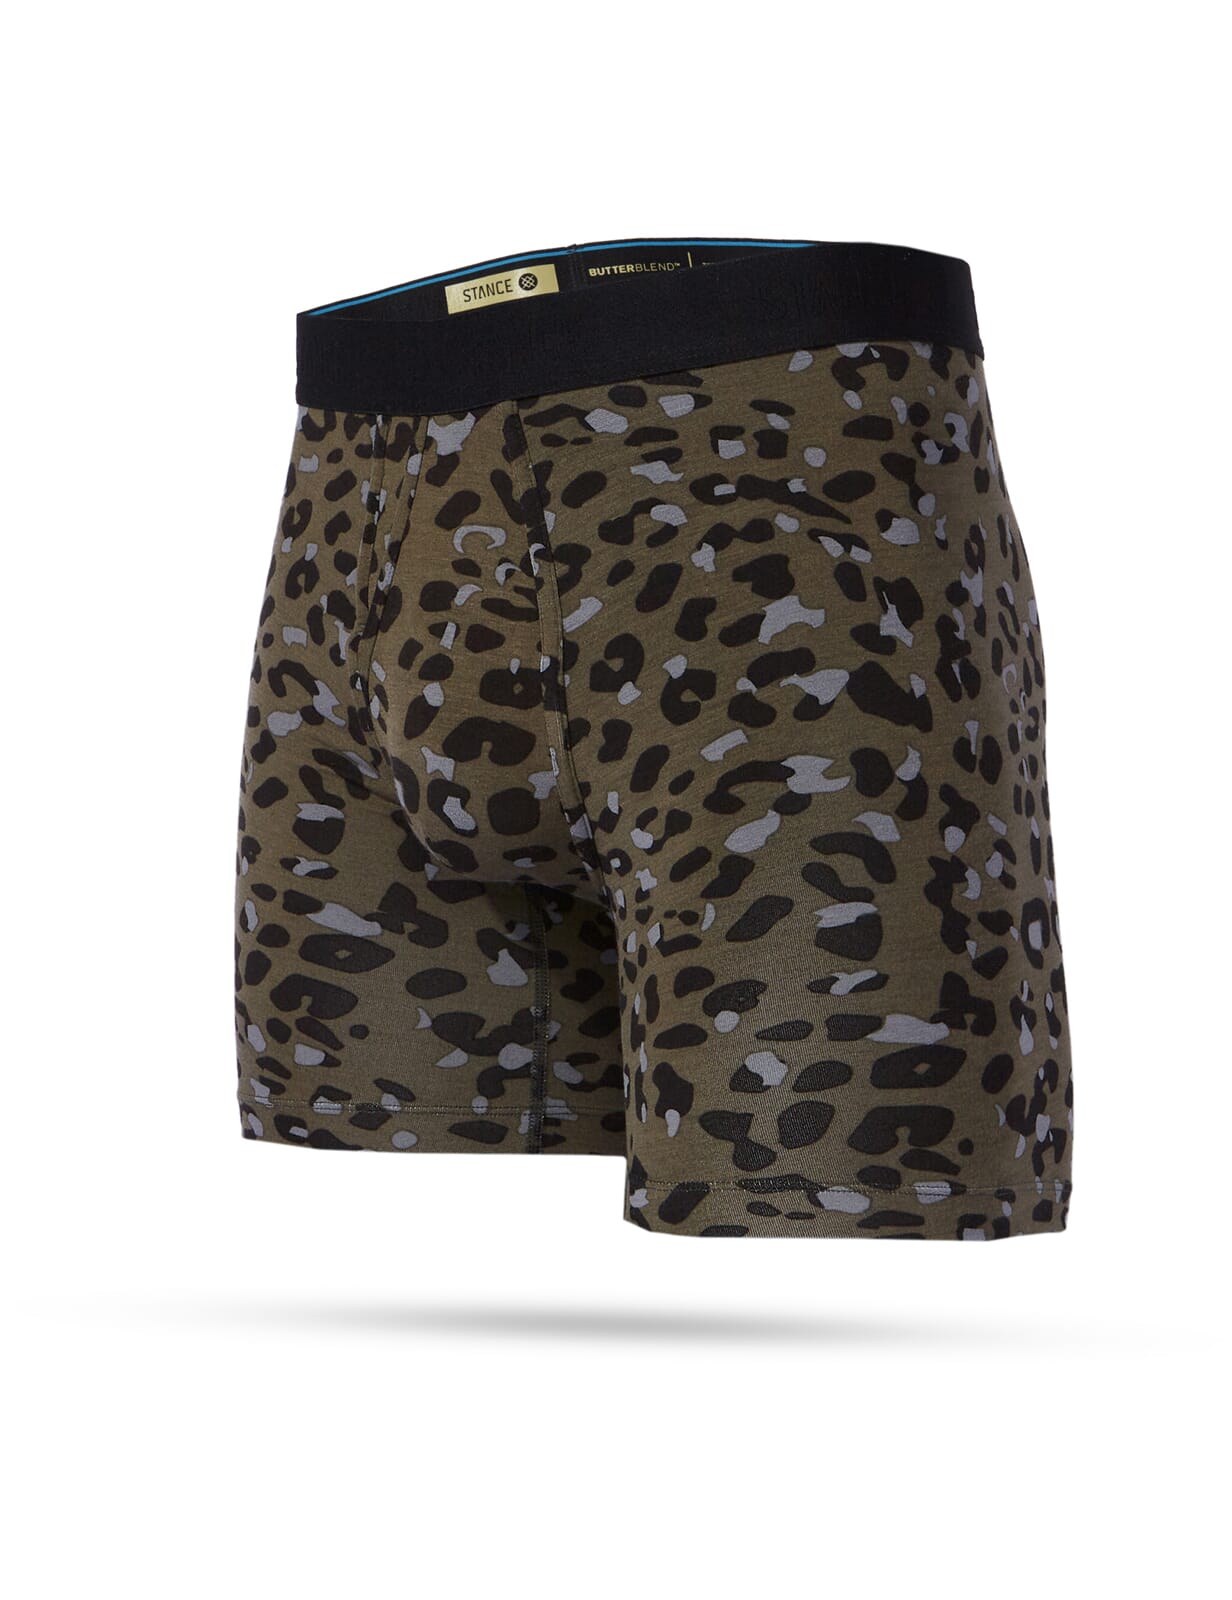 Stance Flower Beds Butter Blend Boxer Brief with Wholester